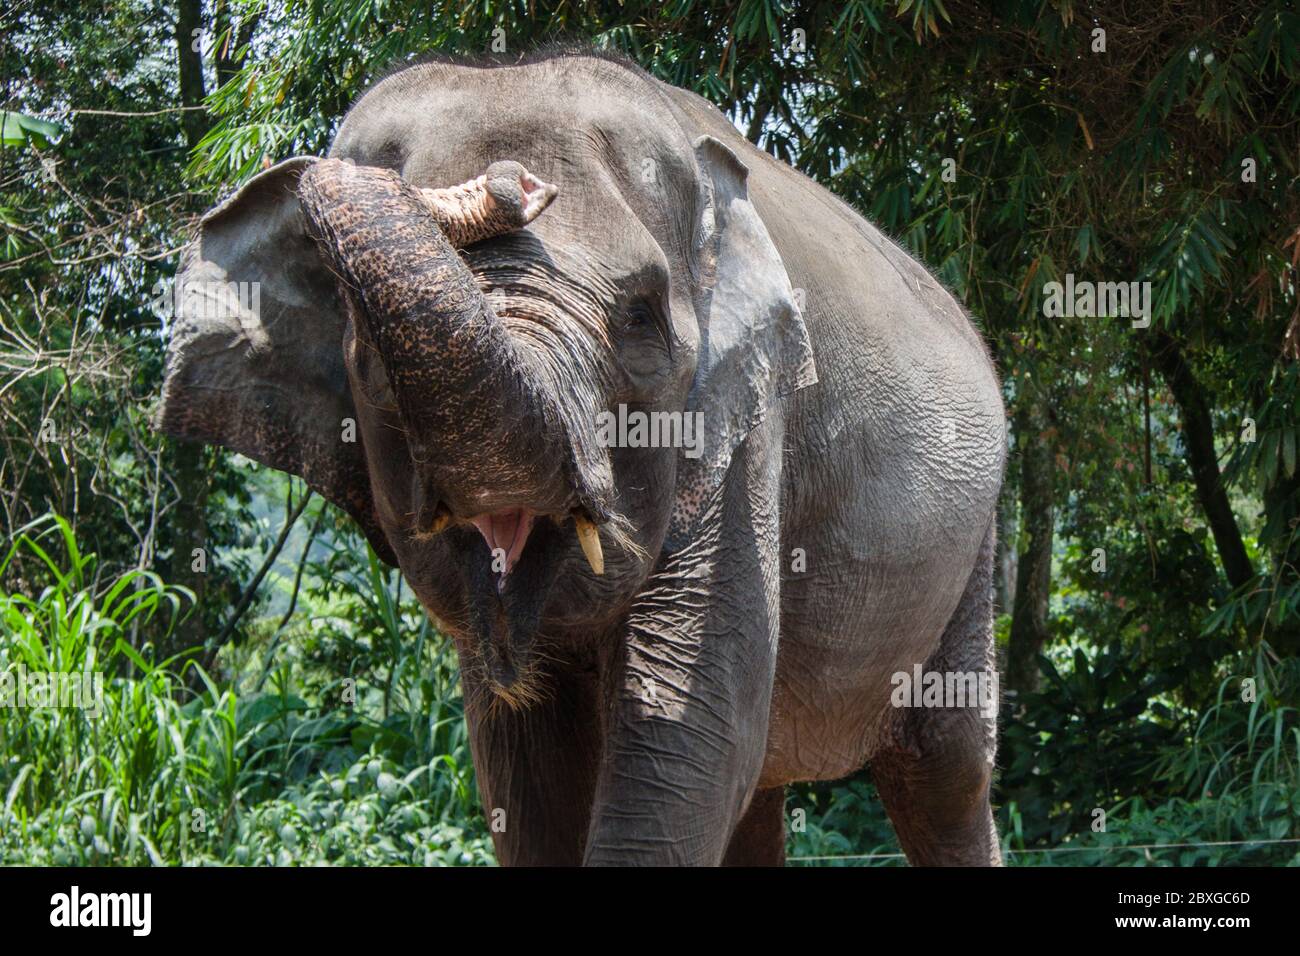 Portrait of an Asian elephant, Indonesia Stock Photo